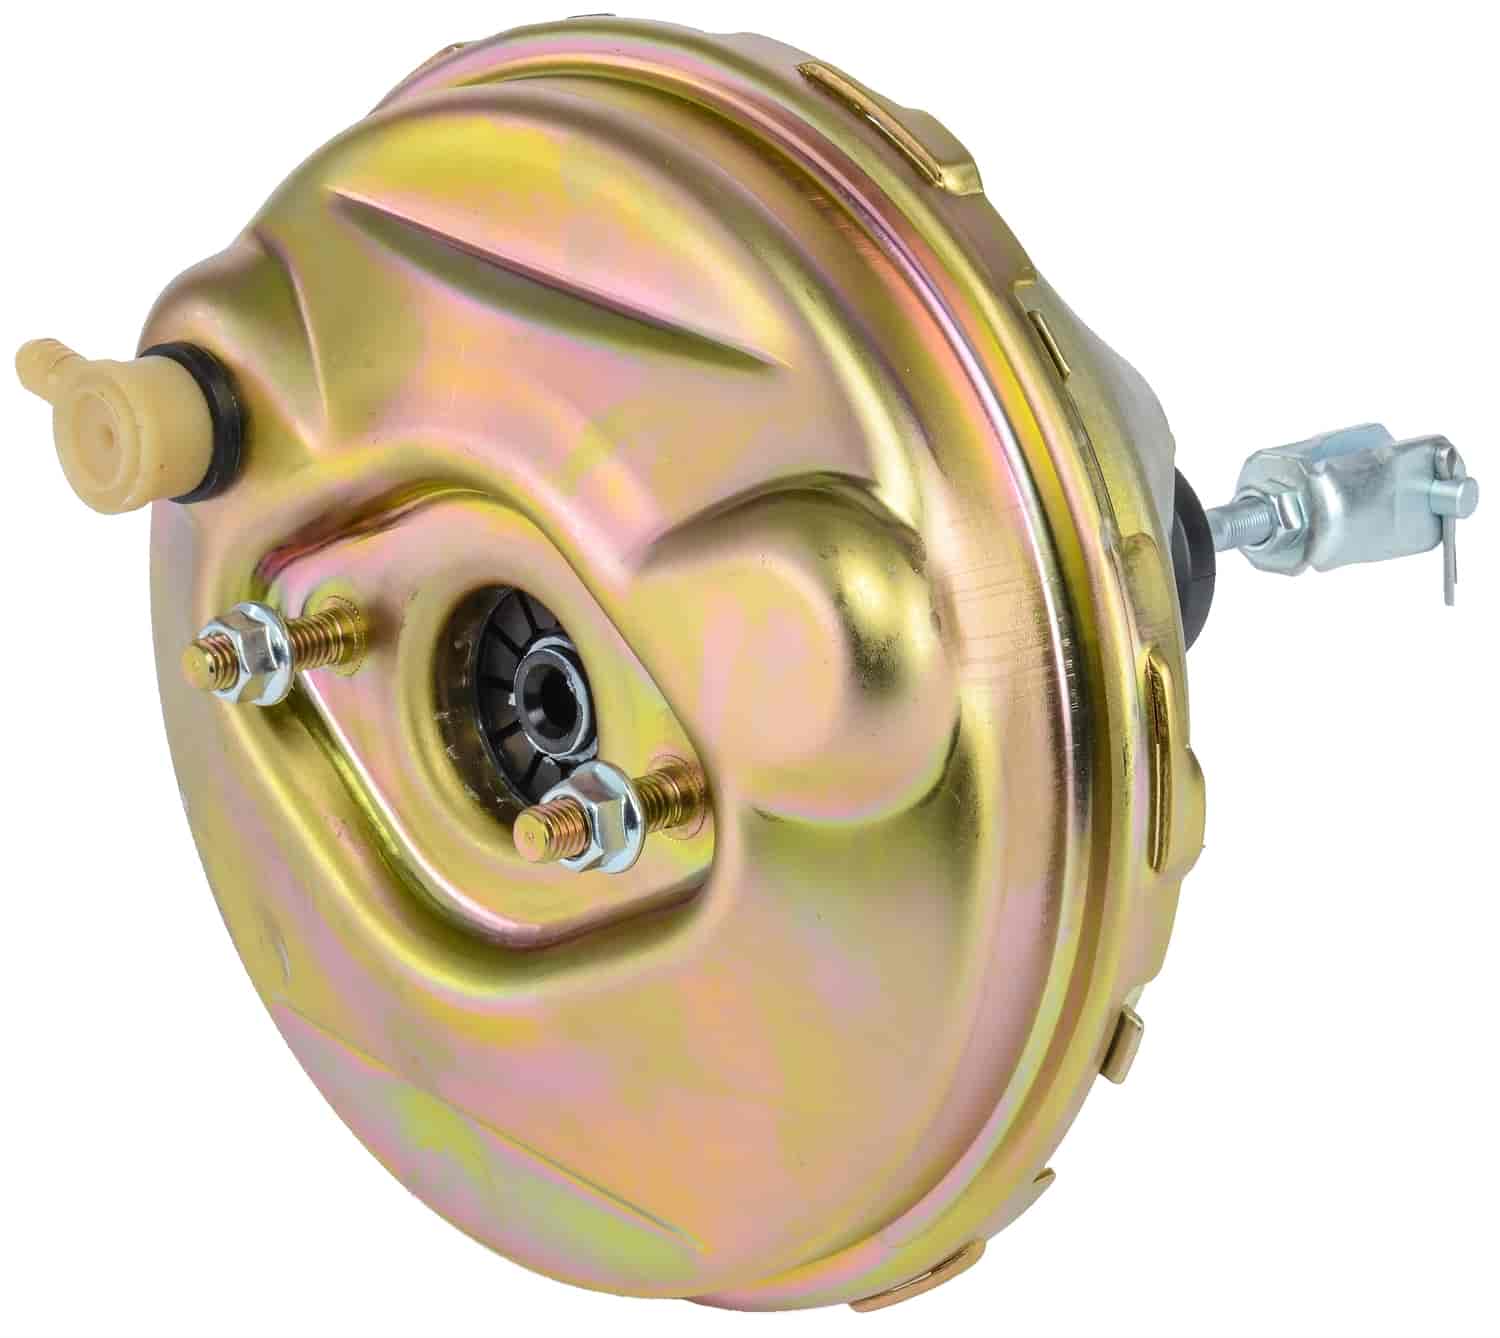 9 in. Brake Booster Delco-Style without Stamp